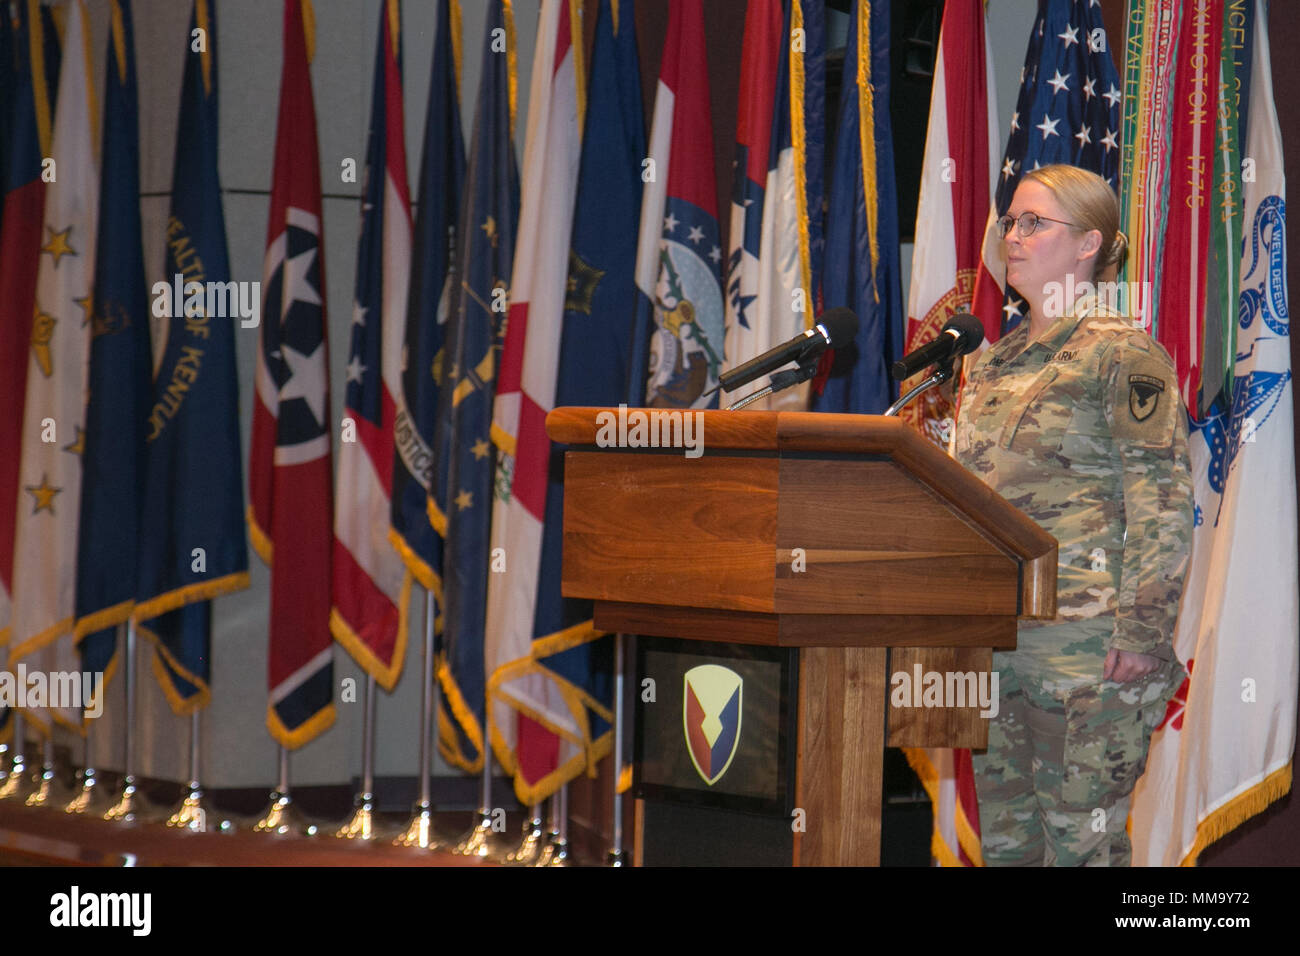 U.S. Army Sgt. Amy Mahoney, a member of the Army Materiel Command's Band, sings the National Anthem during the Hispanic-American Heritage Month Observance celebration Sept. 25, 2017 at Redstone Arsenal, Alabama. The guest speaker for the event was Christine Chavez, granddaughter of labor leader and civil rights activist Cesar Chavez. (U.S. Army photo by Sgt. 1st Class Teddy Wade) Stock Photo